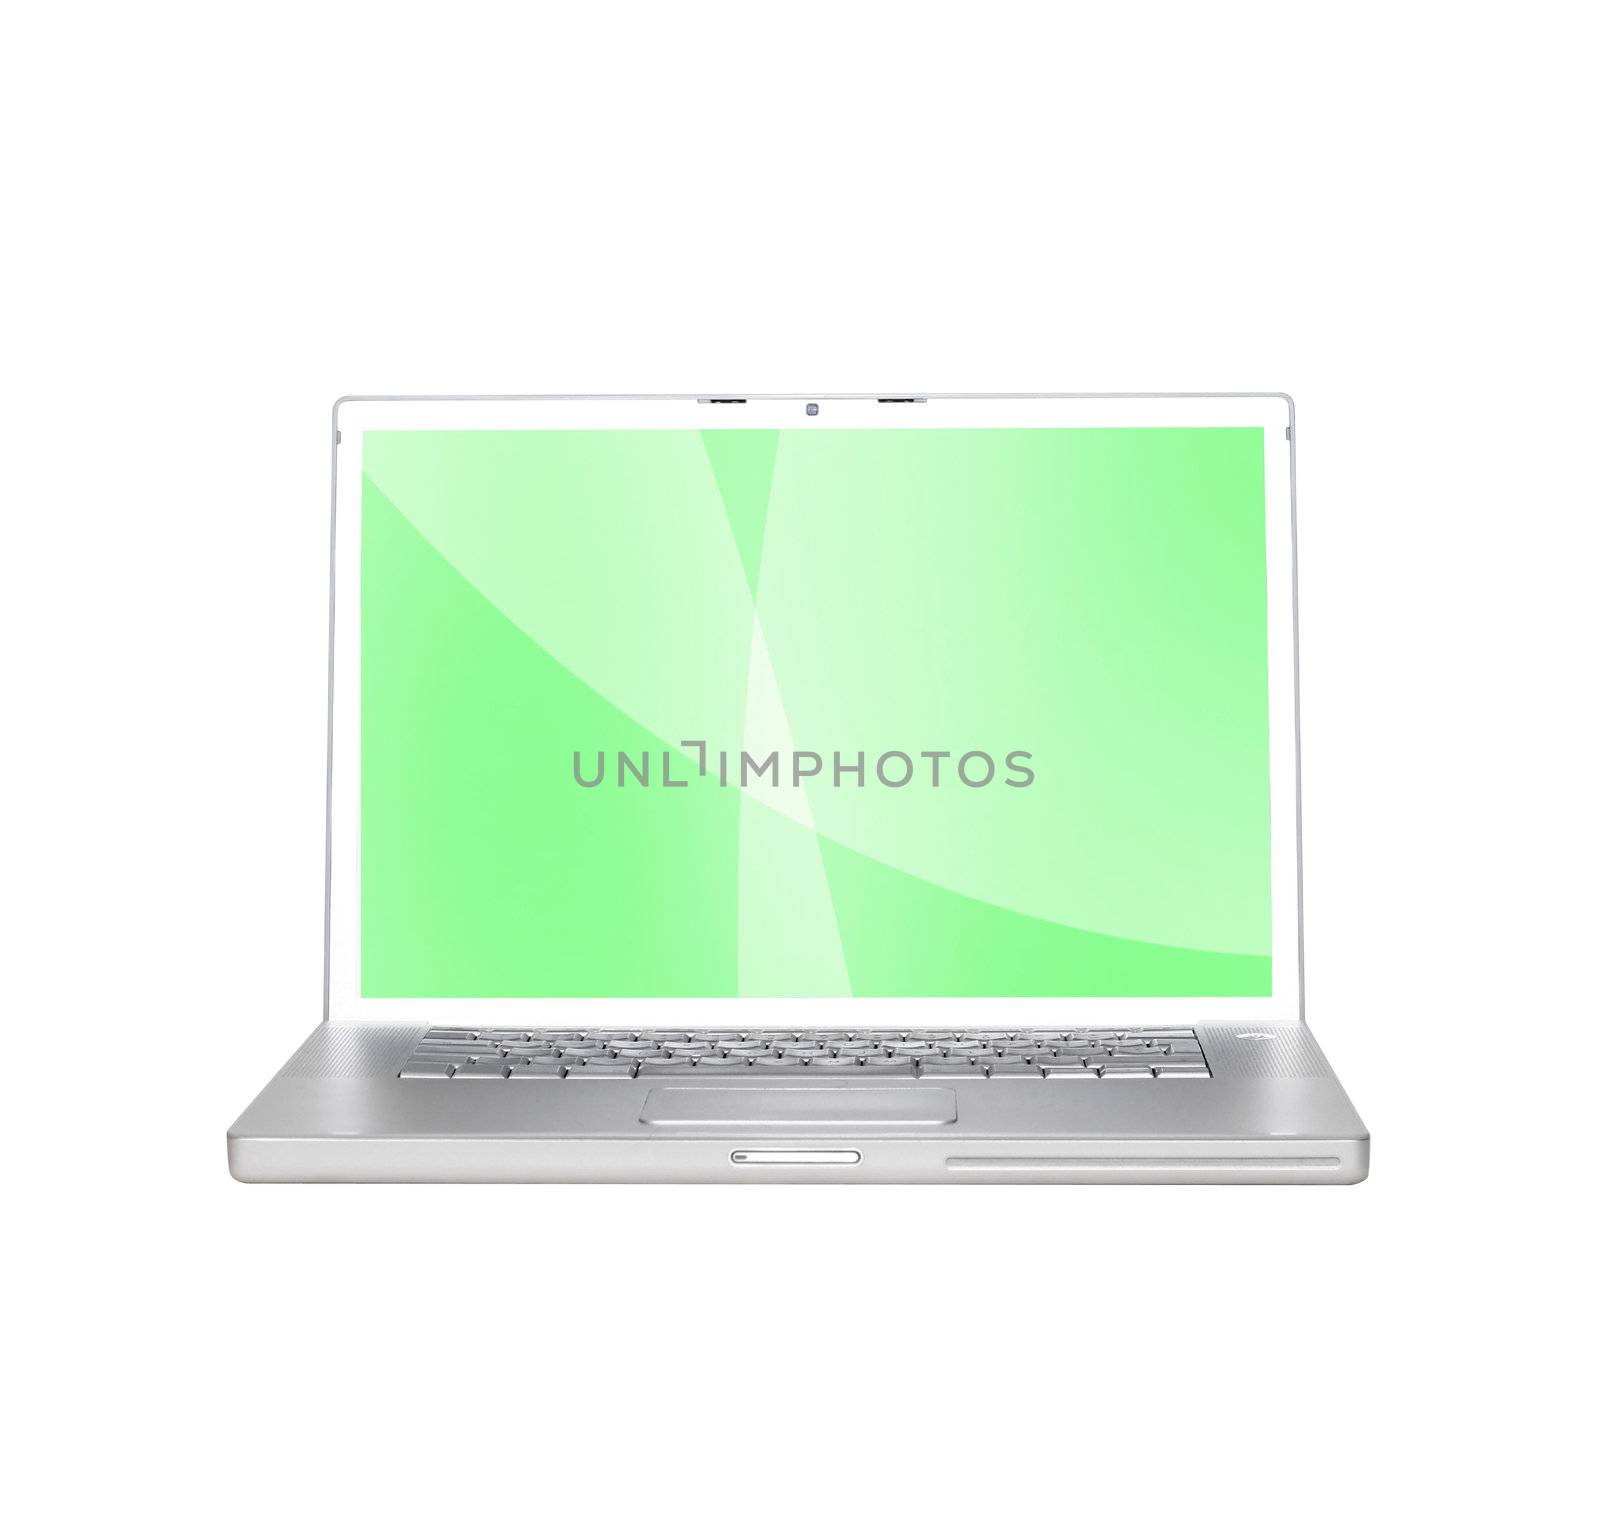 Laptop with background